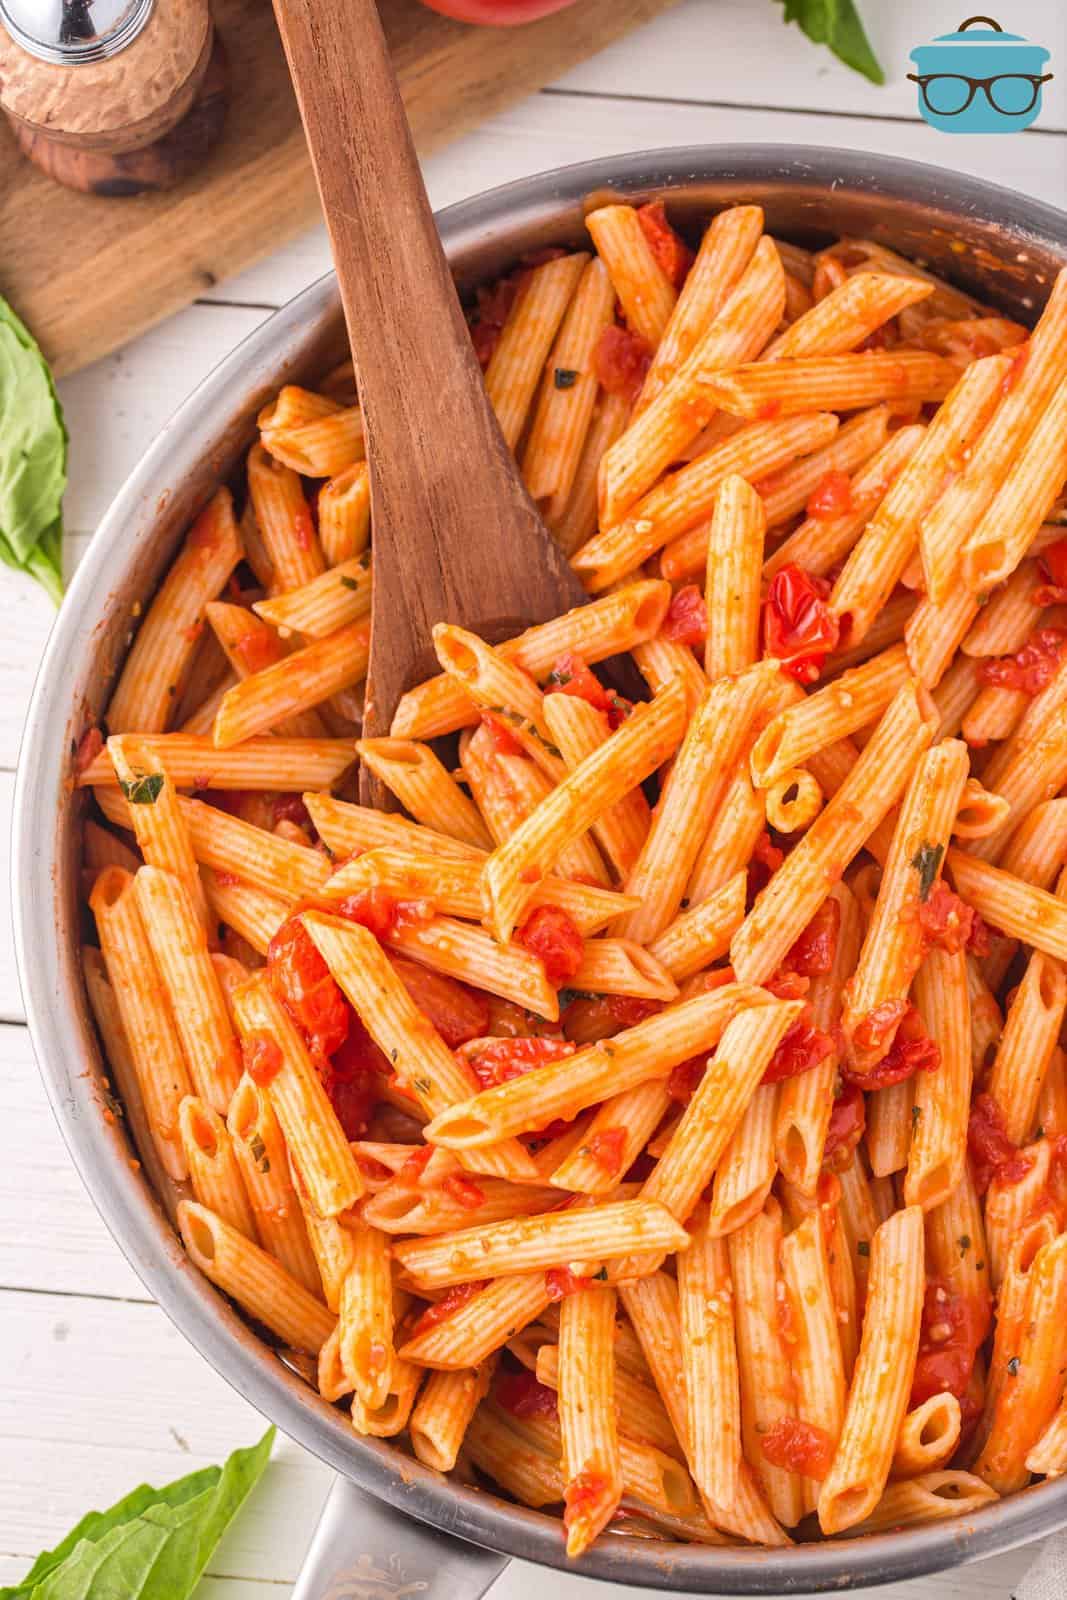 A pot of Penne Pasta with Tomato sauce and a wooden spoon being dipped in it.